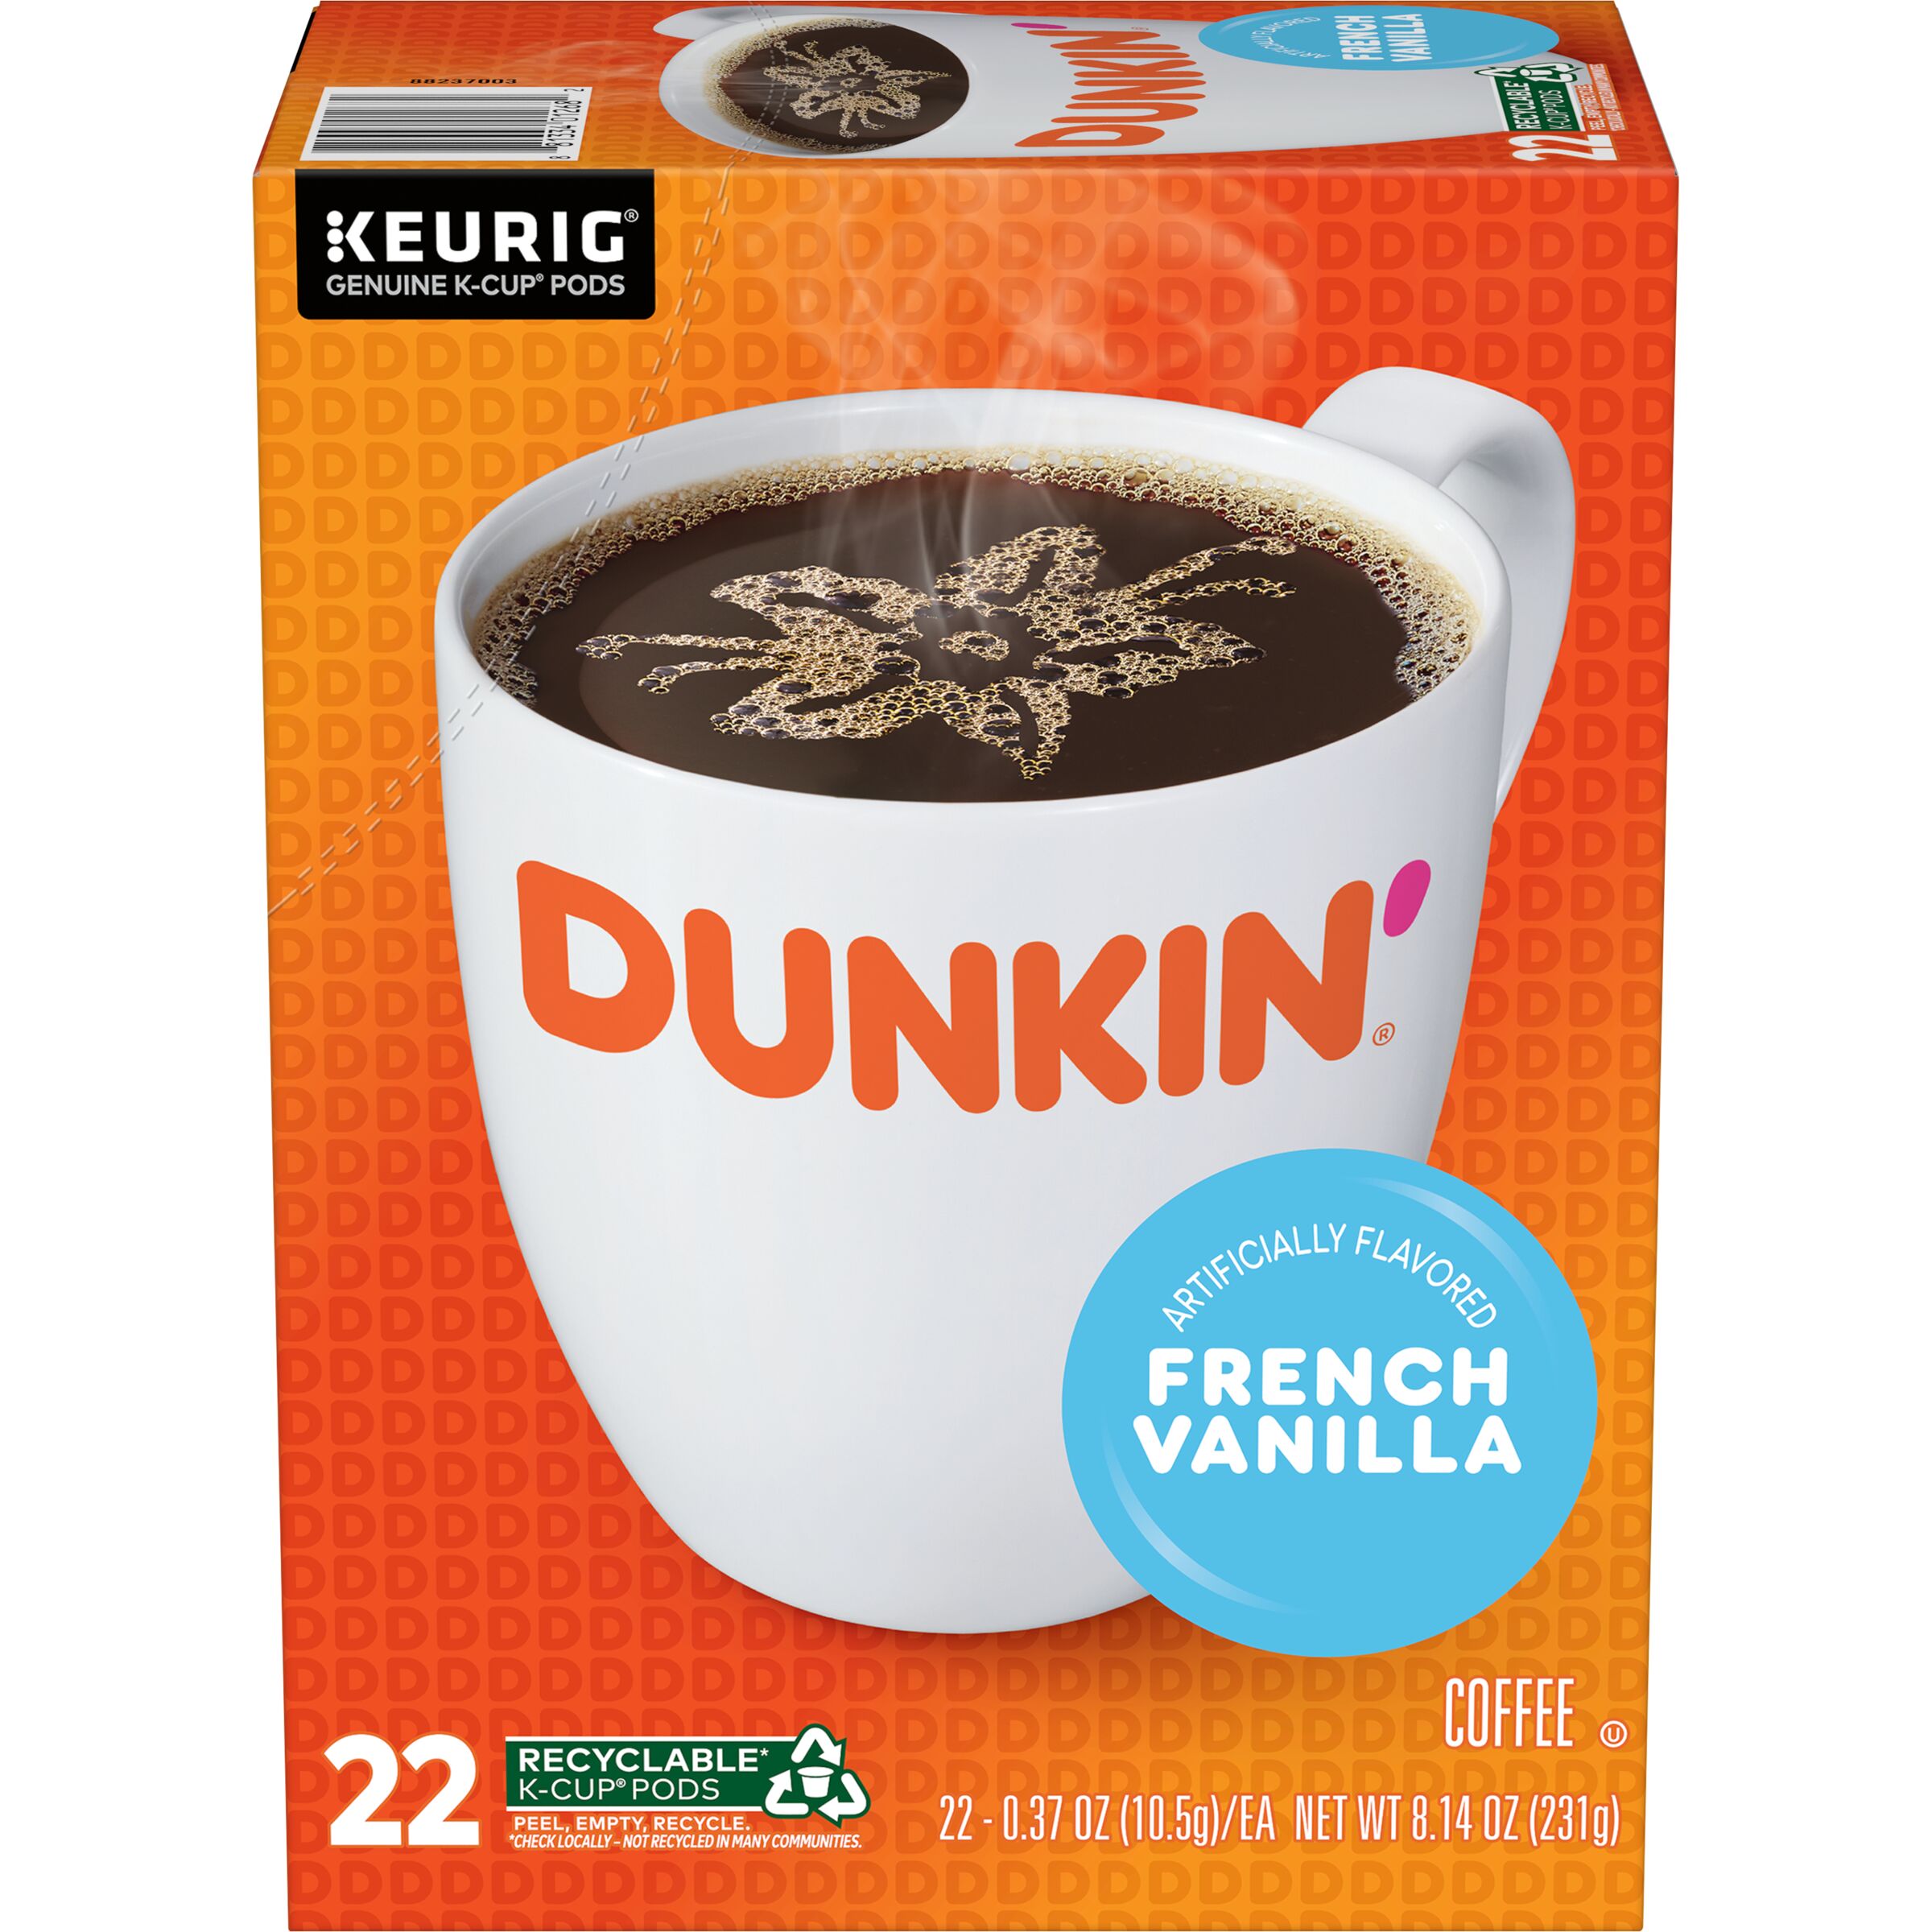 Dunkin' French Vanilla Flavored Coffee, K-Cup Pods